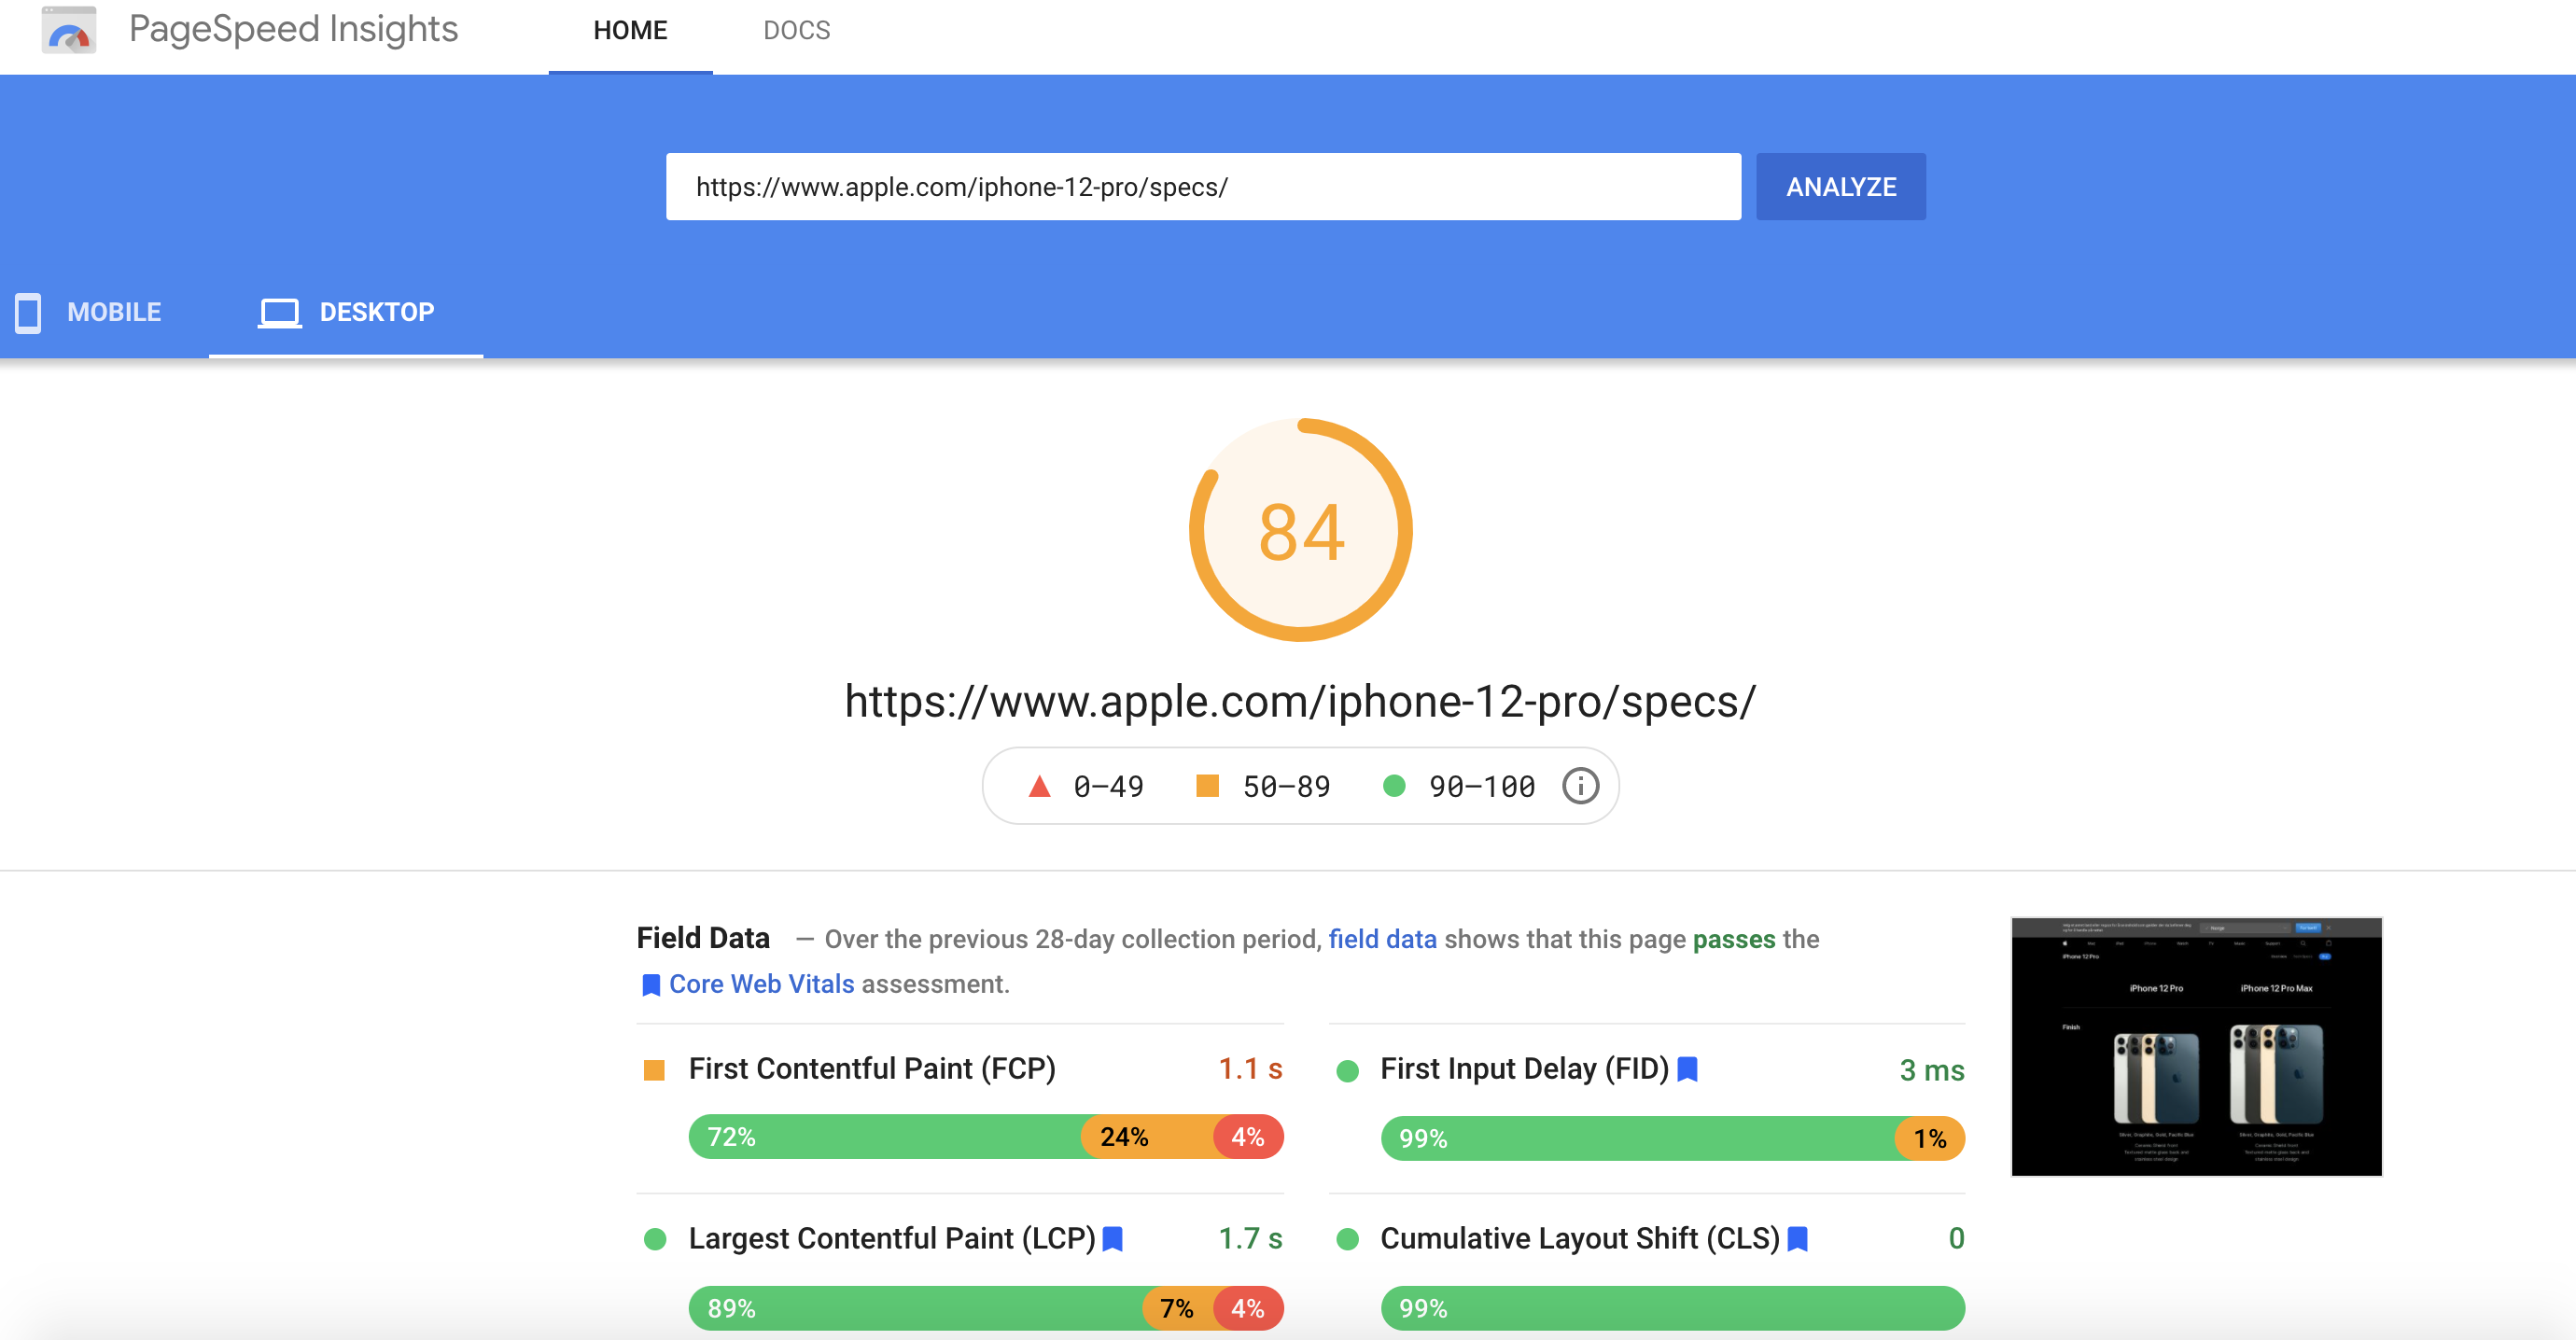 pagespeed insights apple iphone 12 pro webpage